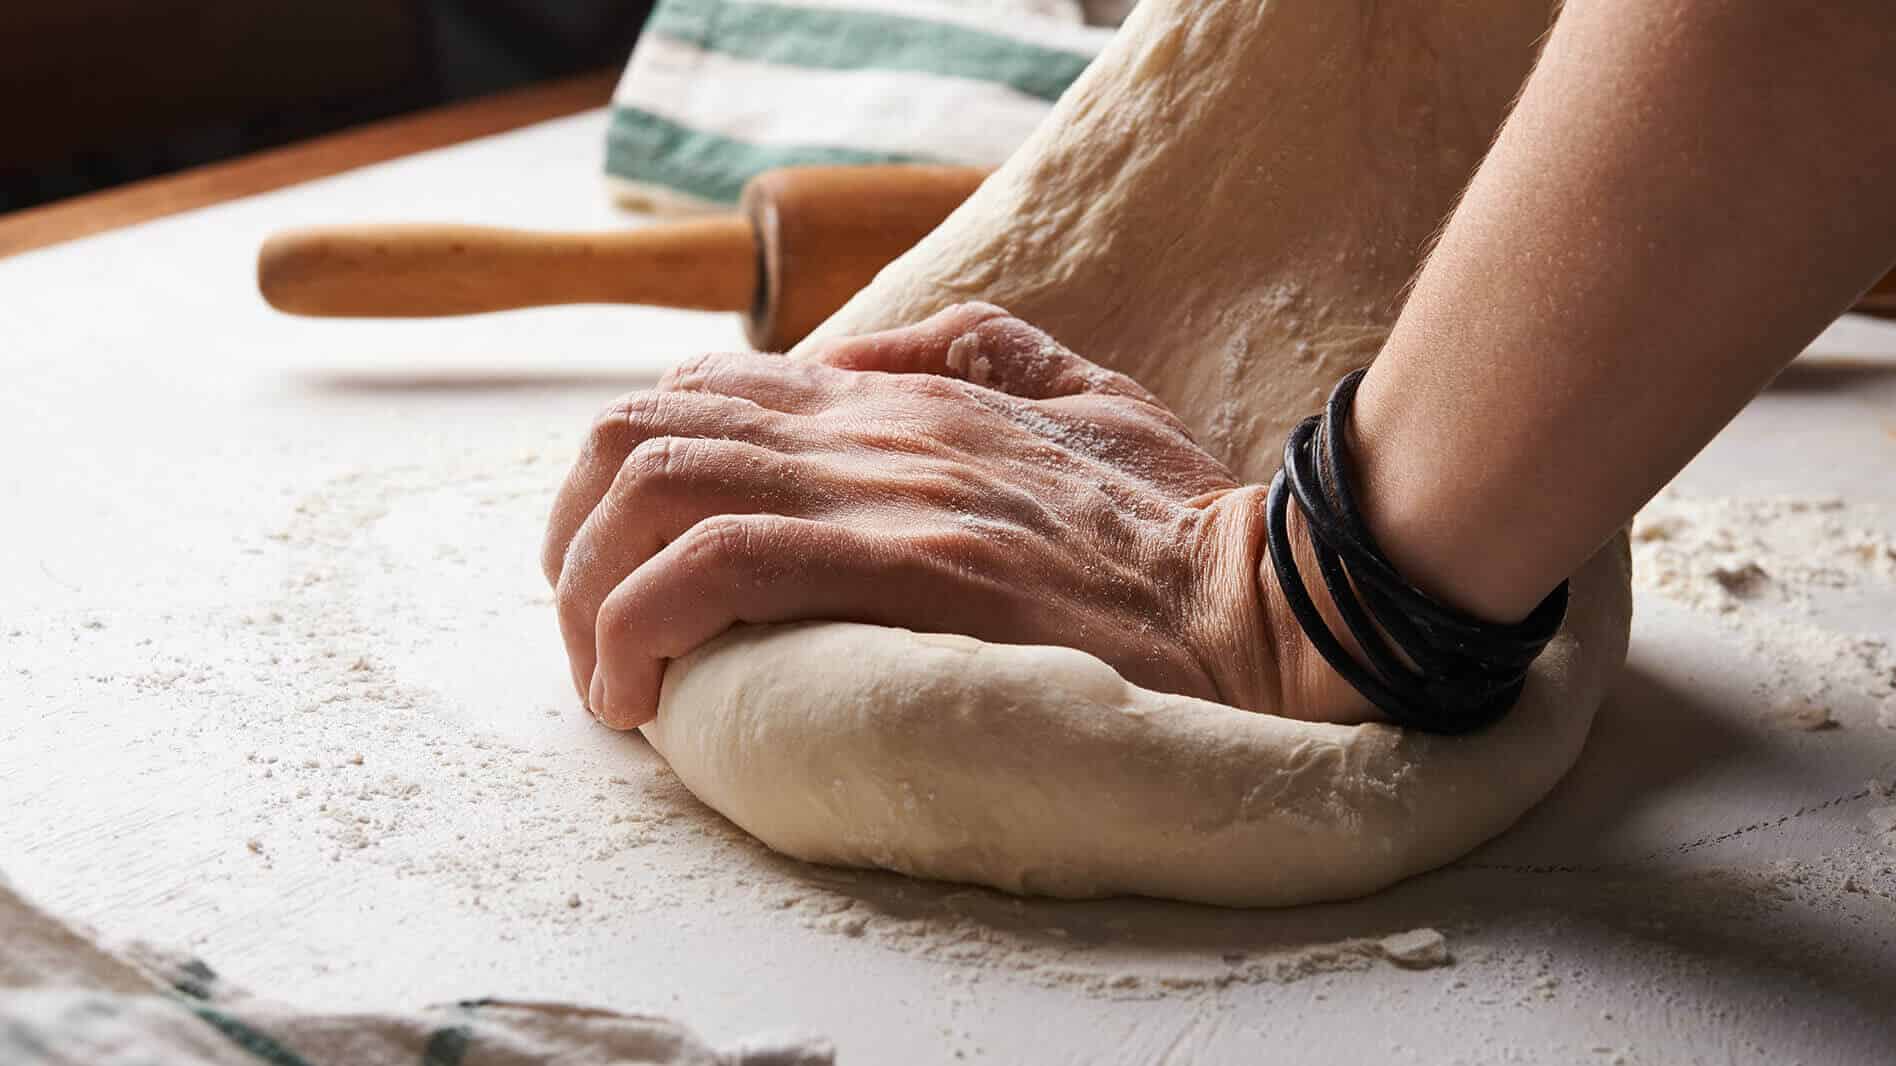 Your Practical Guide to Crafting Better Bread Recipes